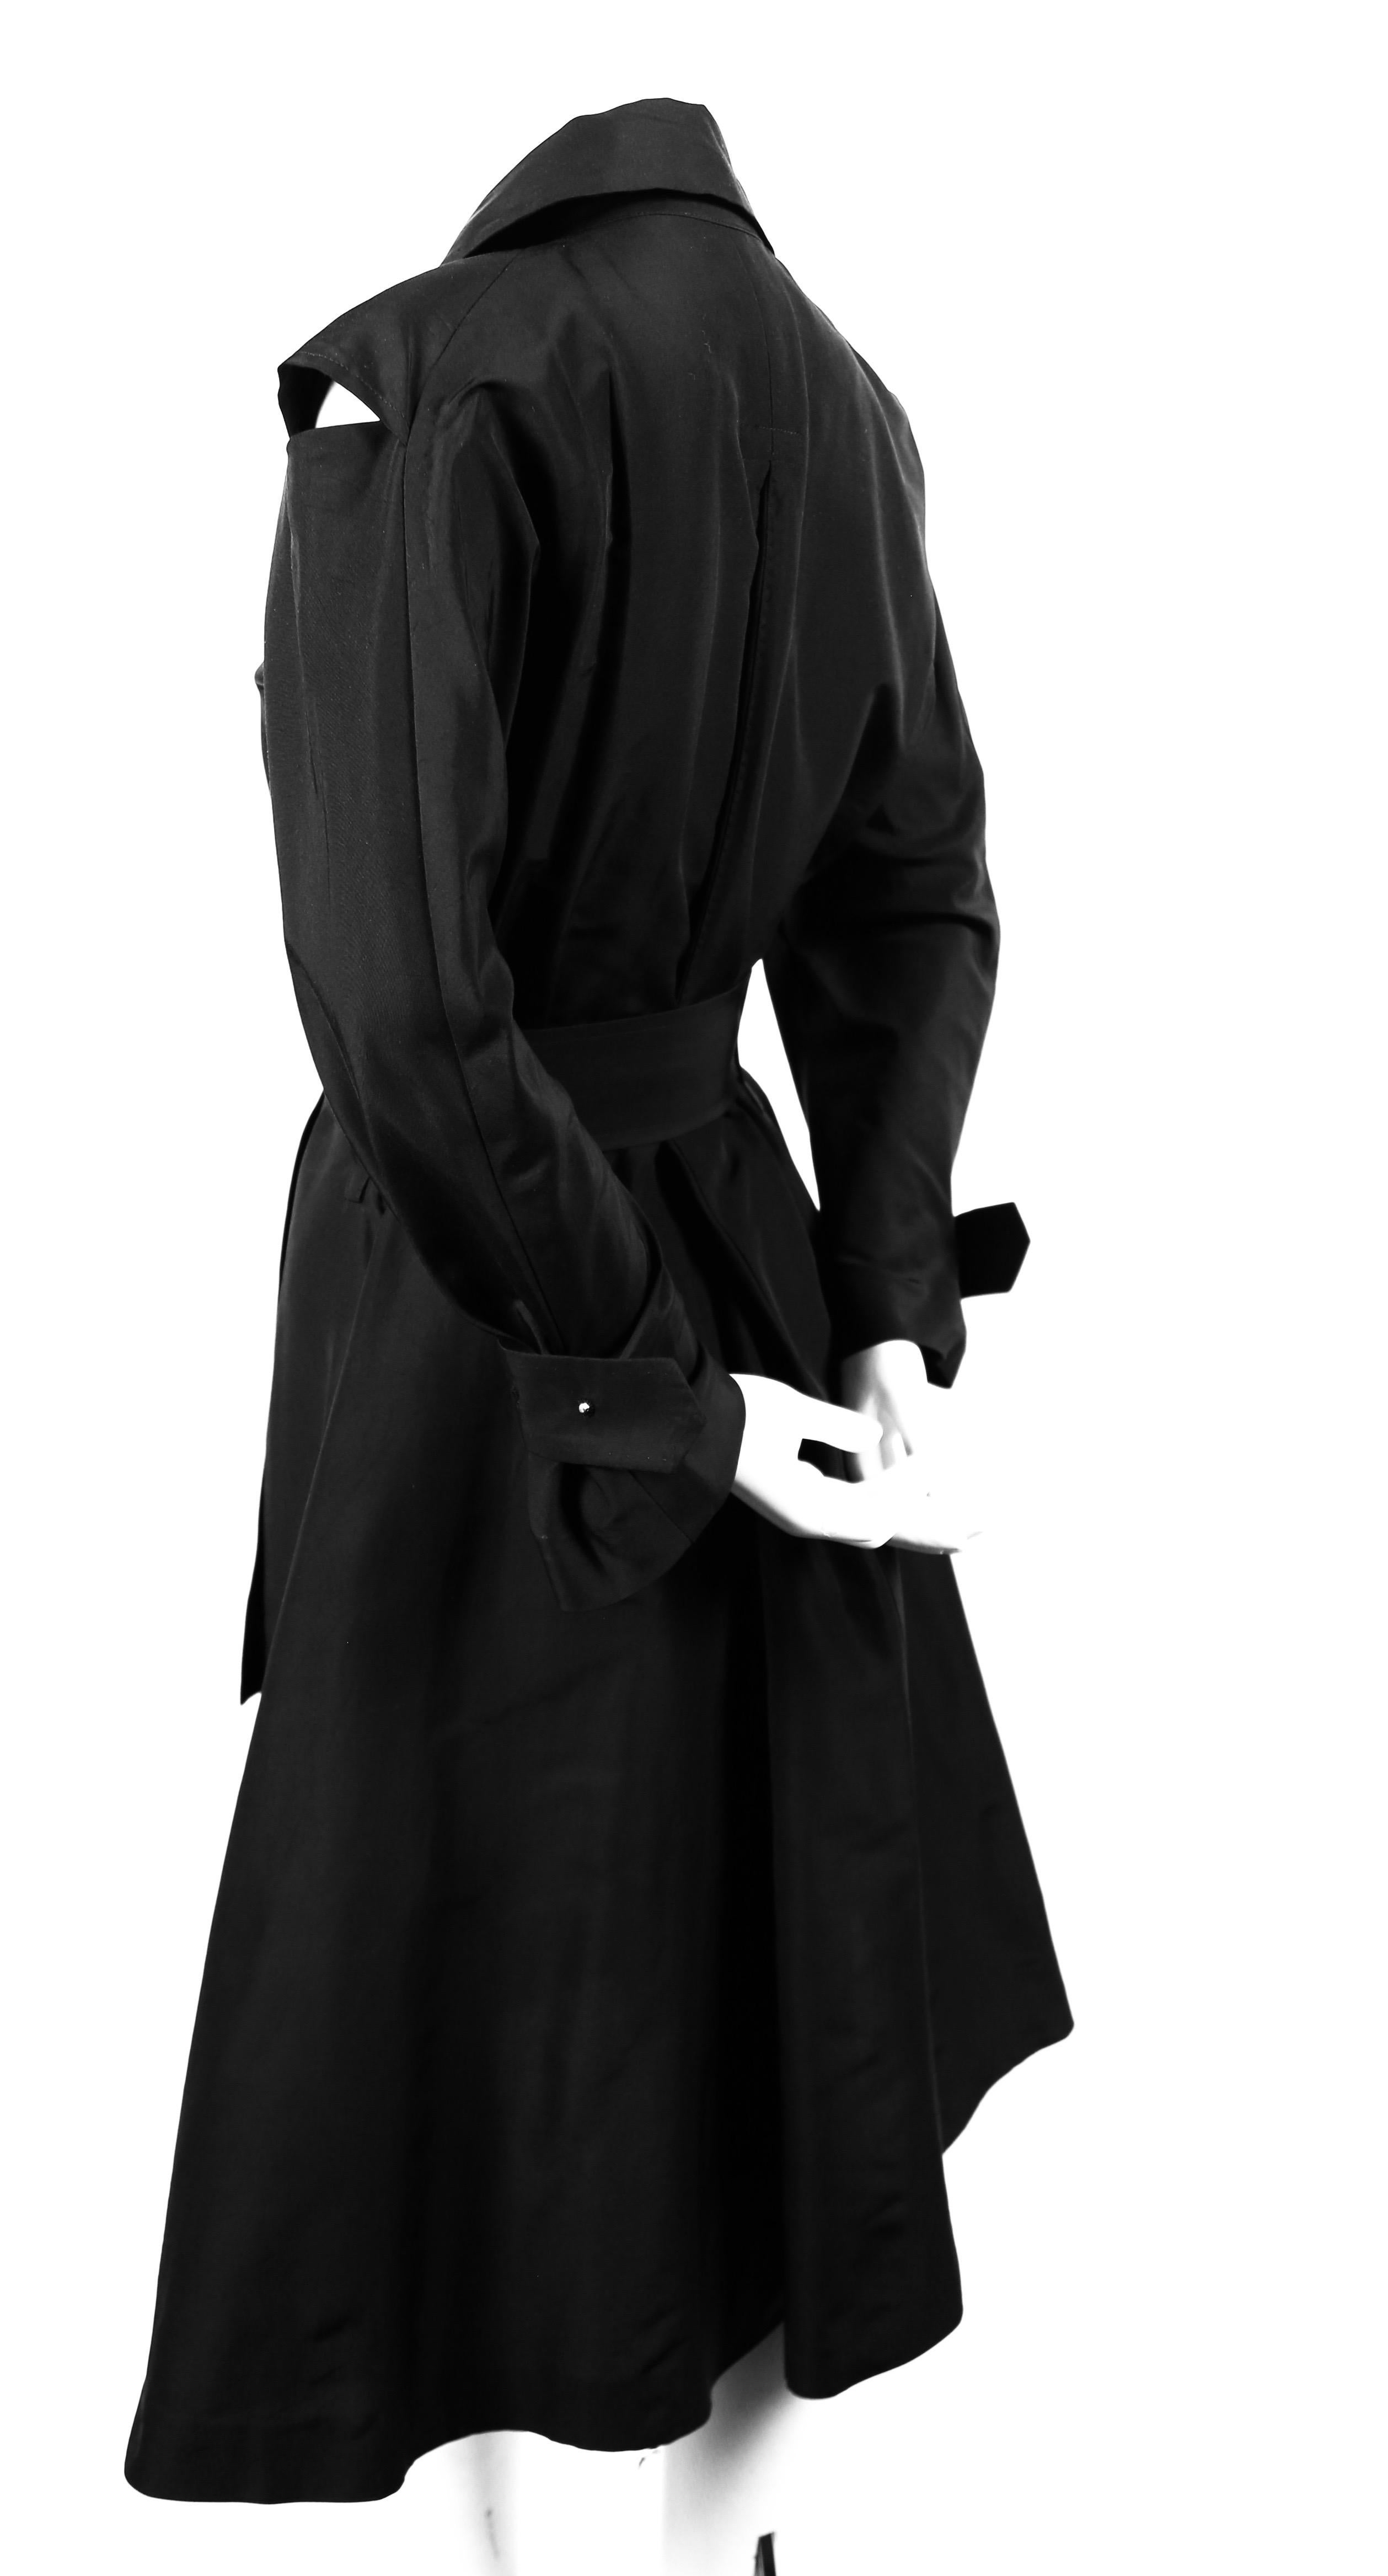 Very unique, black, belted coat dress with cut-out shoulders designed by Yohji Yamamoto dating to the late 1990's. Very dramatic silhouette. Labeled a size '2', which best fits a US 4 to 6. Measurements are difficult to take due to wrap closure.